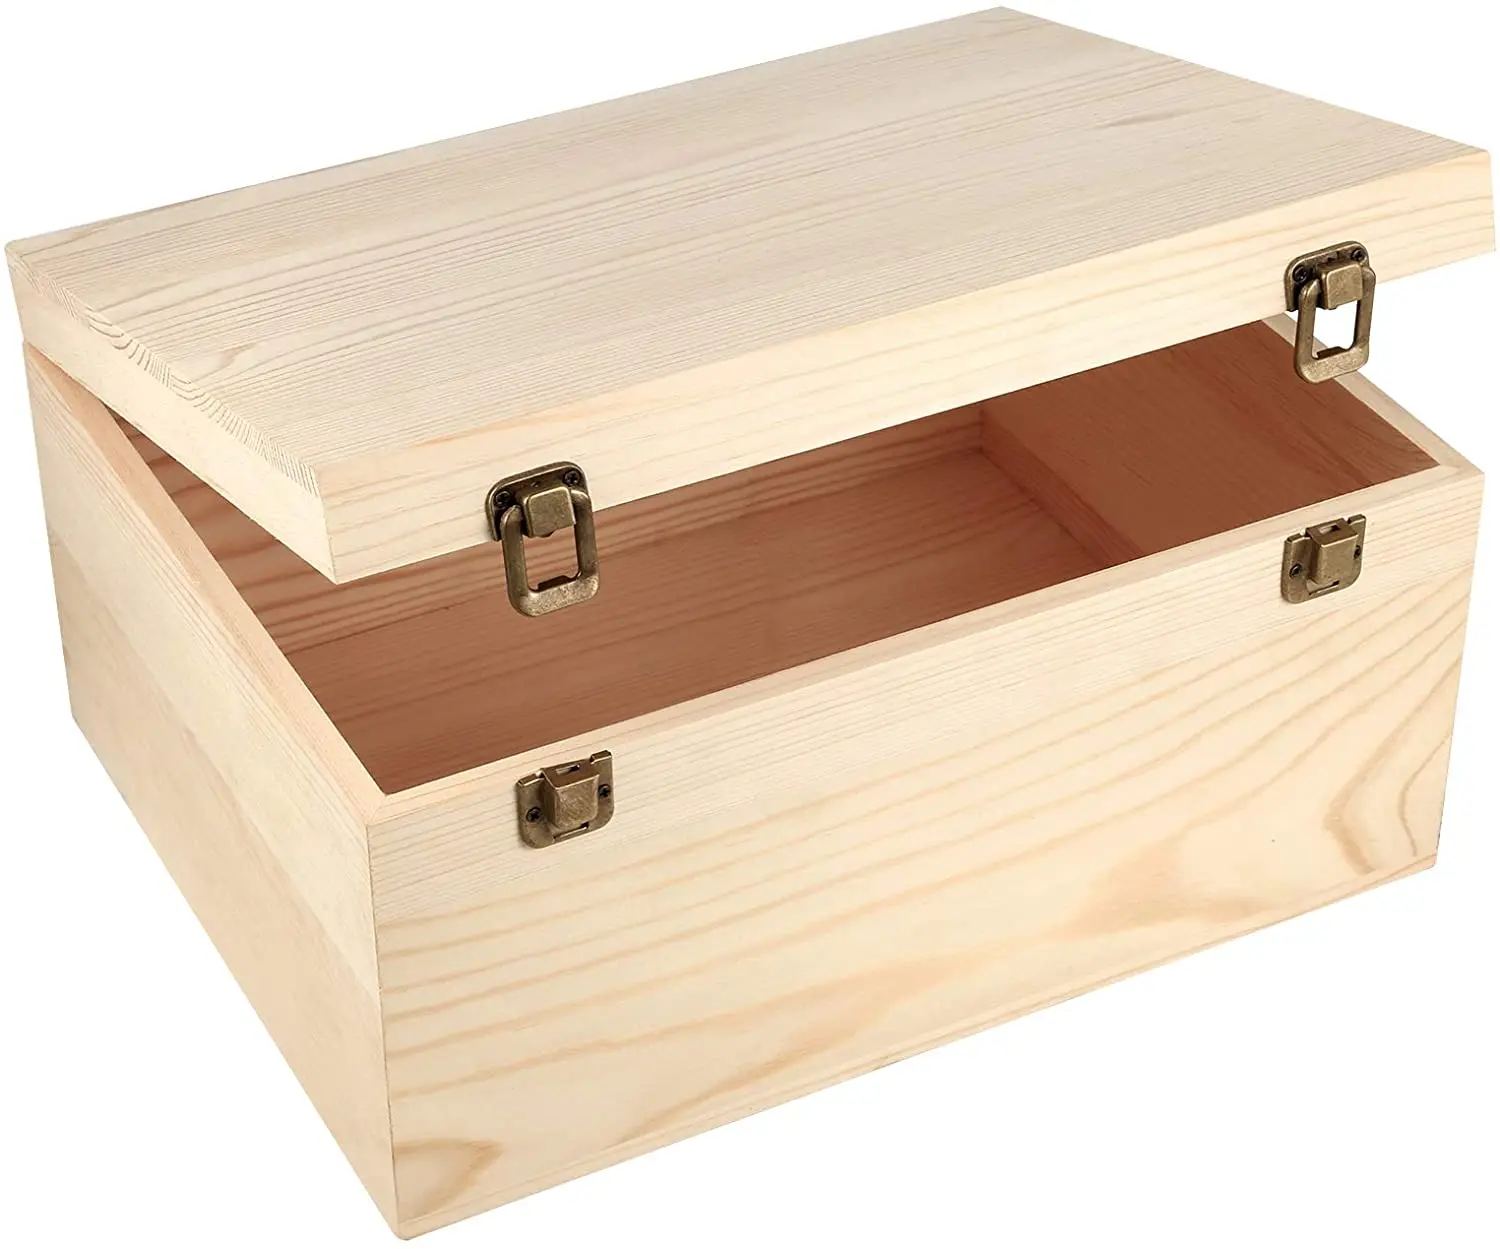 Extra Large Wood Box 13 X 10 X 6 5 Inches Large Wood Box With Hinged Lid And 2 Front Clasp For Crafts Art Hobbies Jewelry Bo Buy Wooden Jewelry Boxes Solid Wood Storage Box